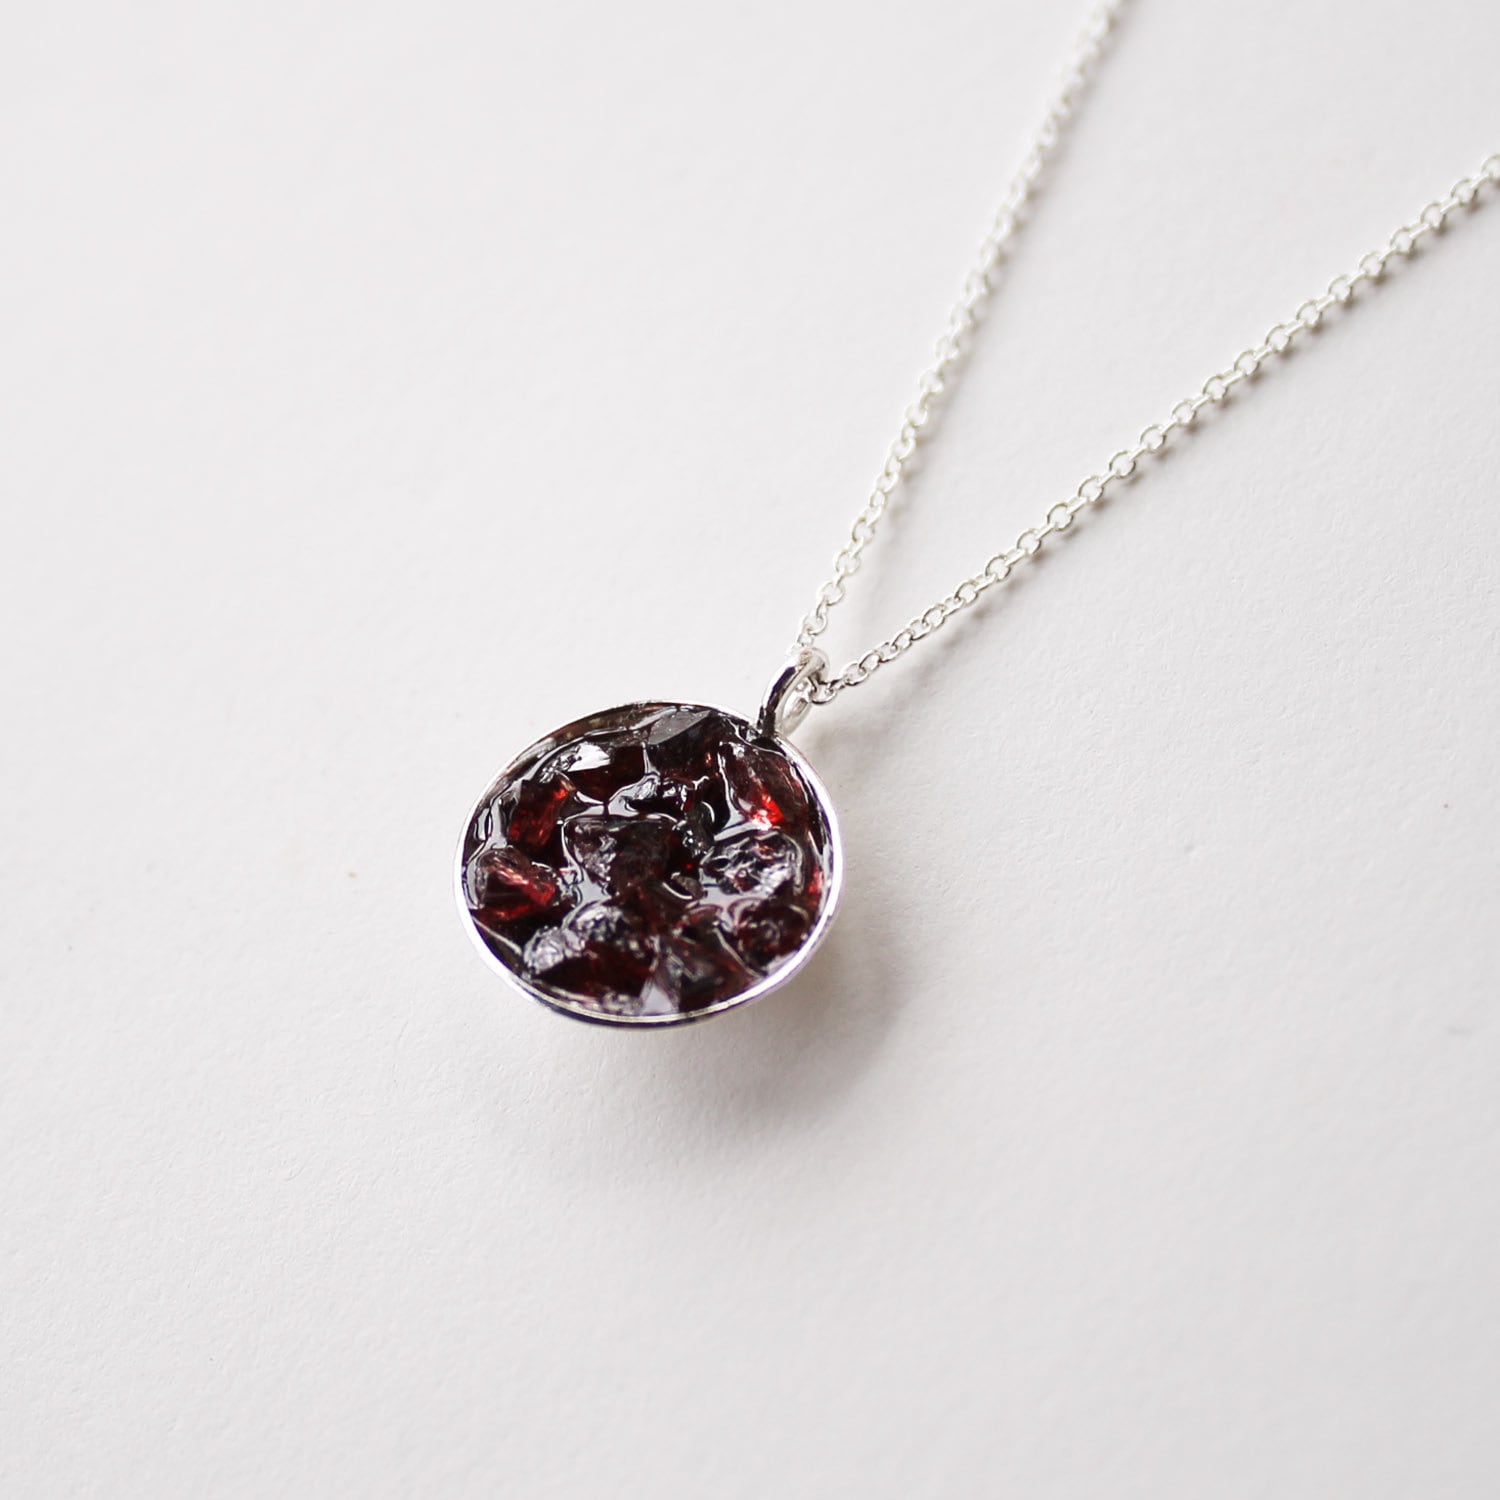 Crushed Crystal Garnet Necklace Pendant in by BonFireCraft on Etsy